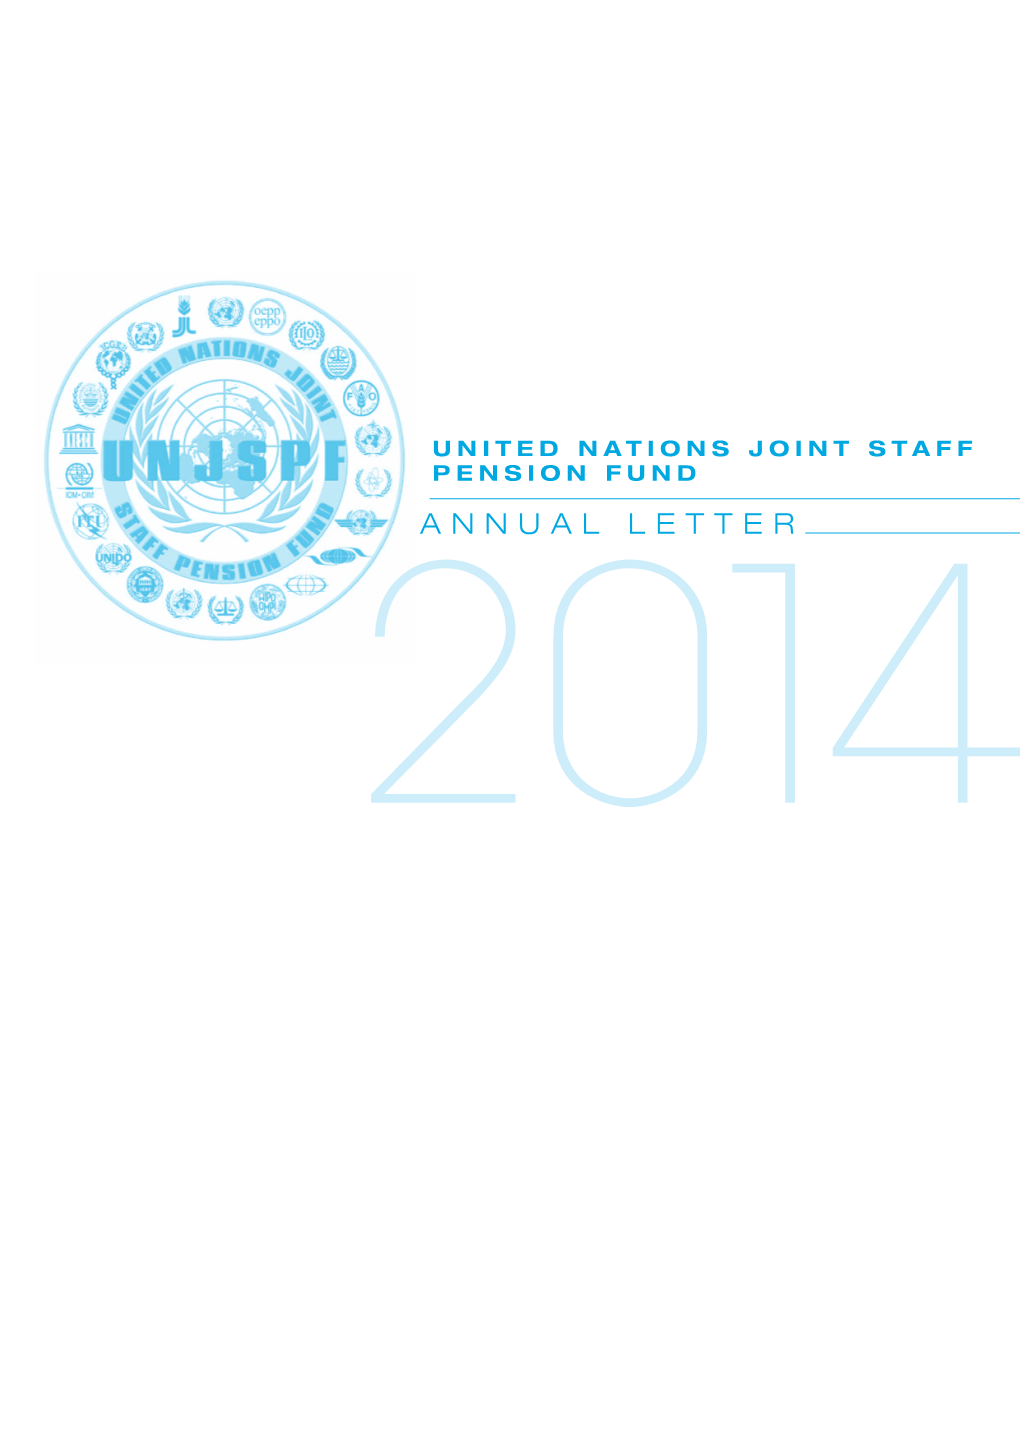 Annual Letter 2014